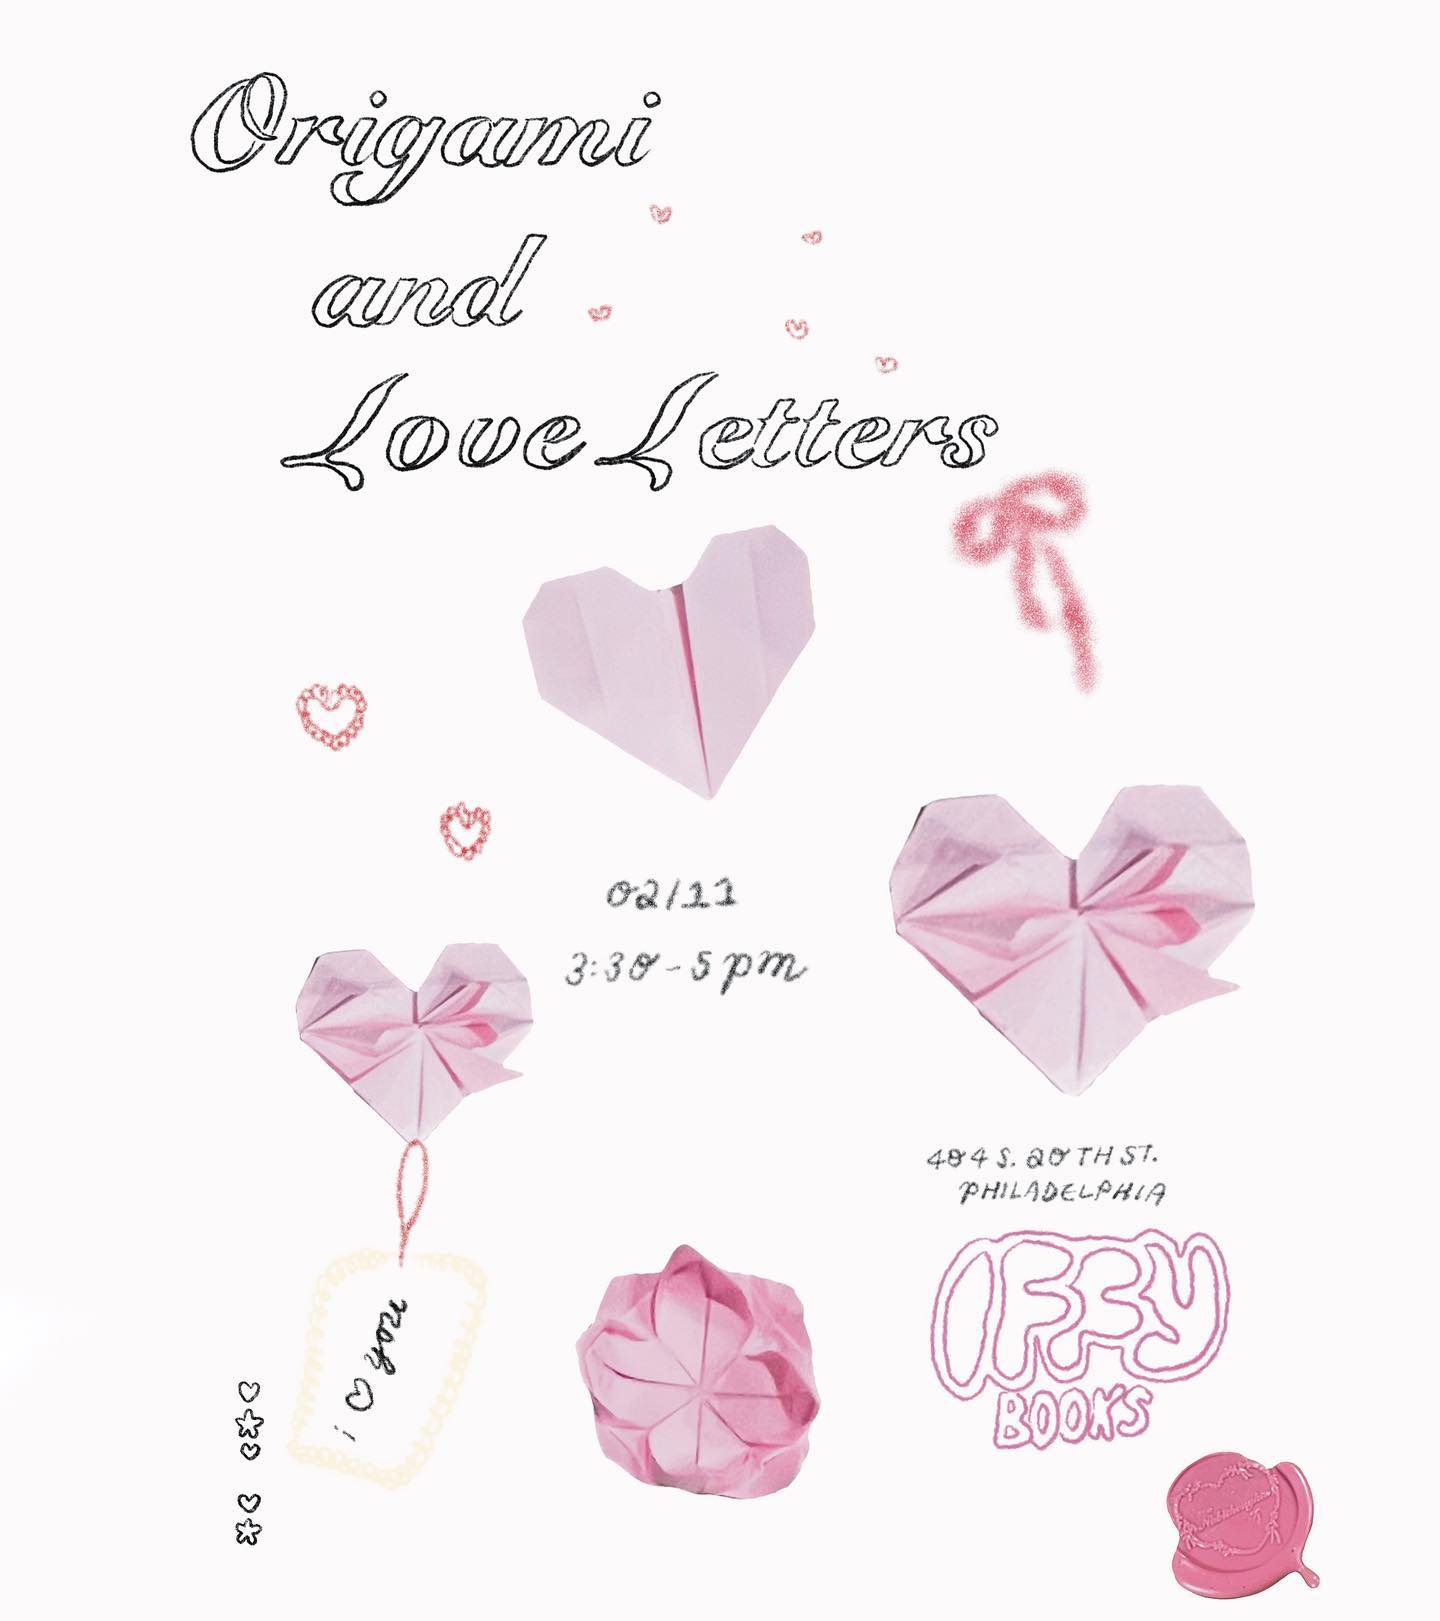 Flyer with several origami hearts made of pink paper, doodles of hearts and stars, and the following handwritten text: "Origami and Love Letters / 02/11 3:30 - 5 pm / 404 S. 20th St., Philadelphia / Iffy Books"